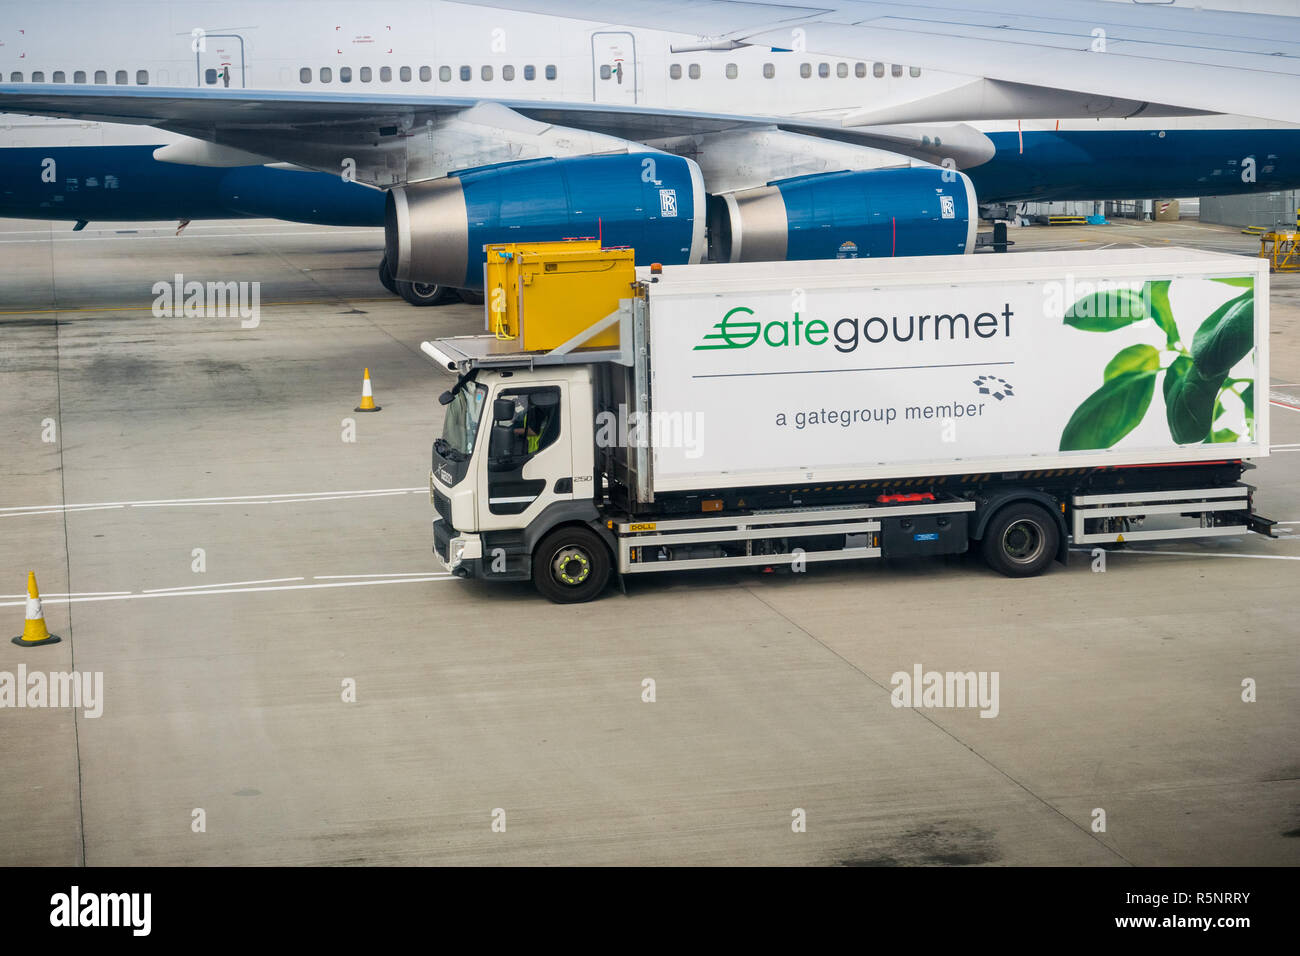 September 24, 2017 London/UK - Gate Gourmet truck delivers food and drink to the air crafts about to depart from Heathrow airport Stock Photo